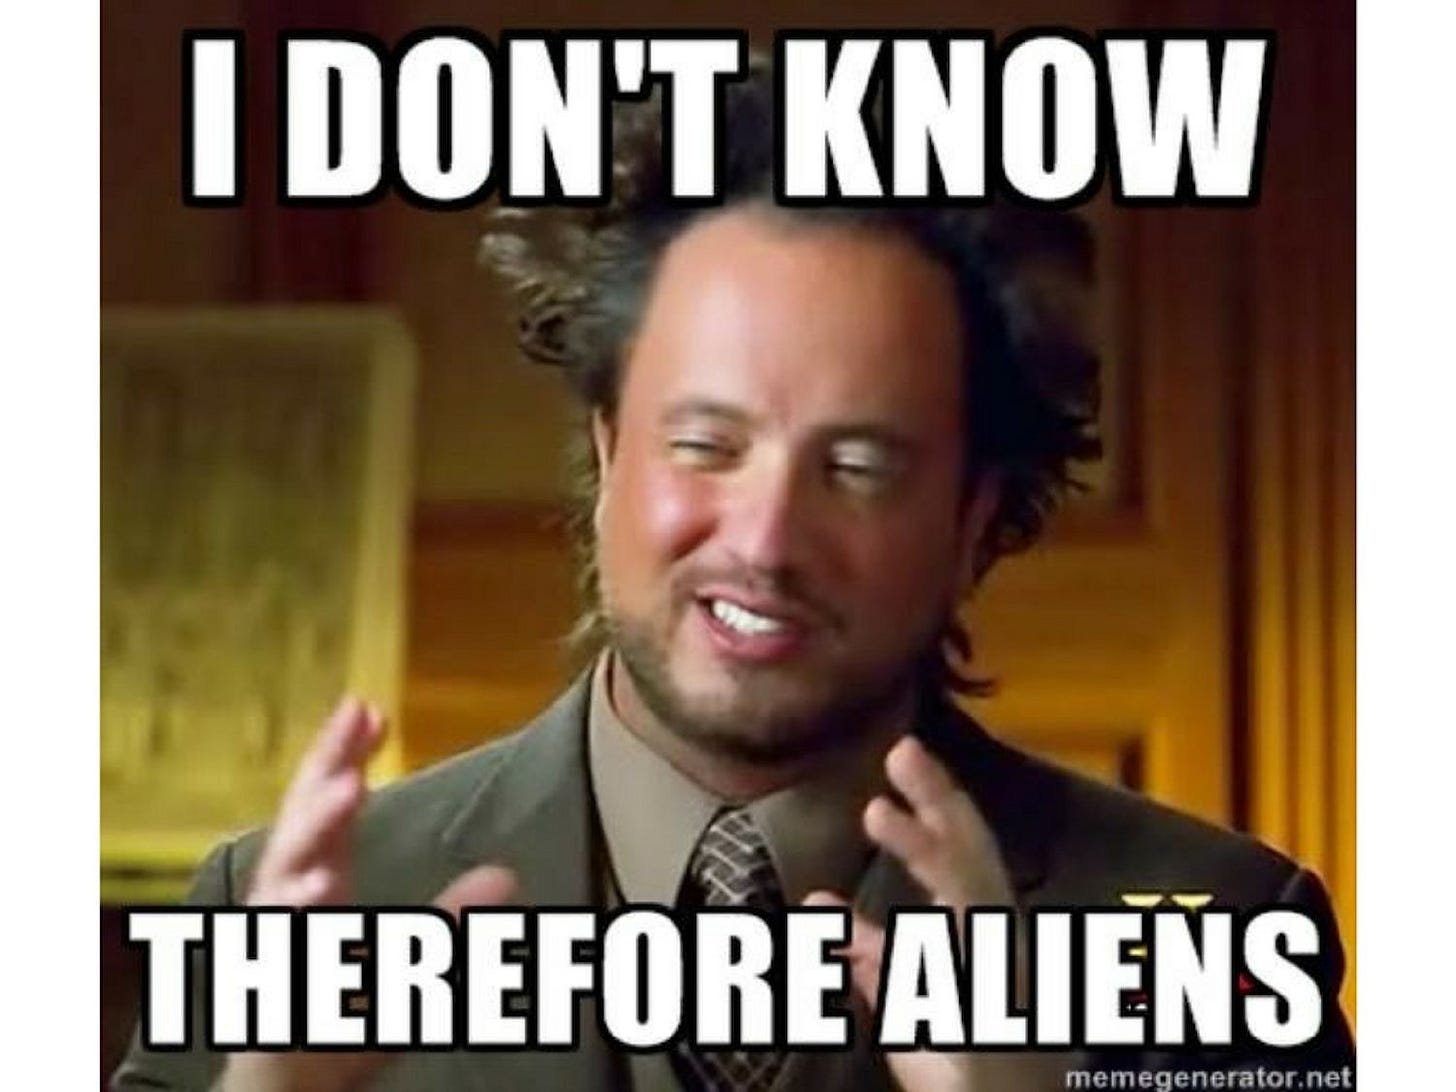 The 15 Funniest Memes About How It Was Aliens